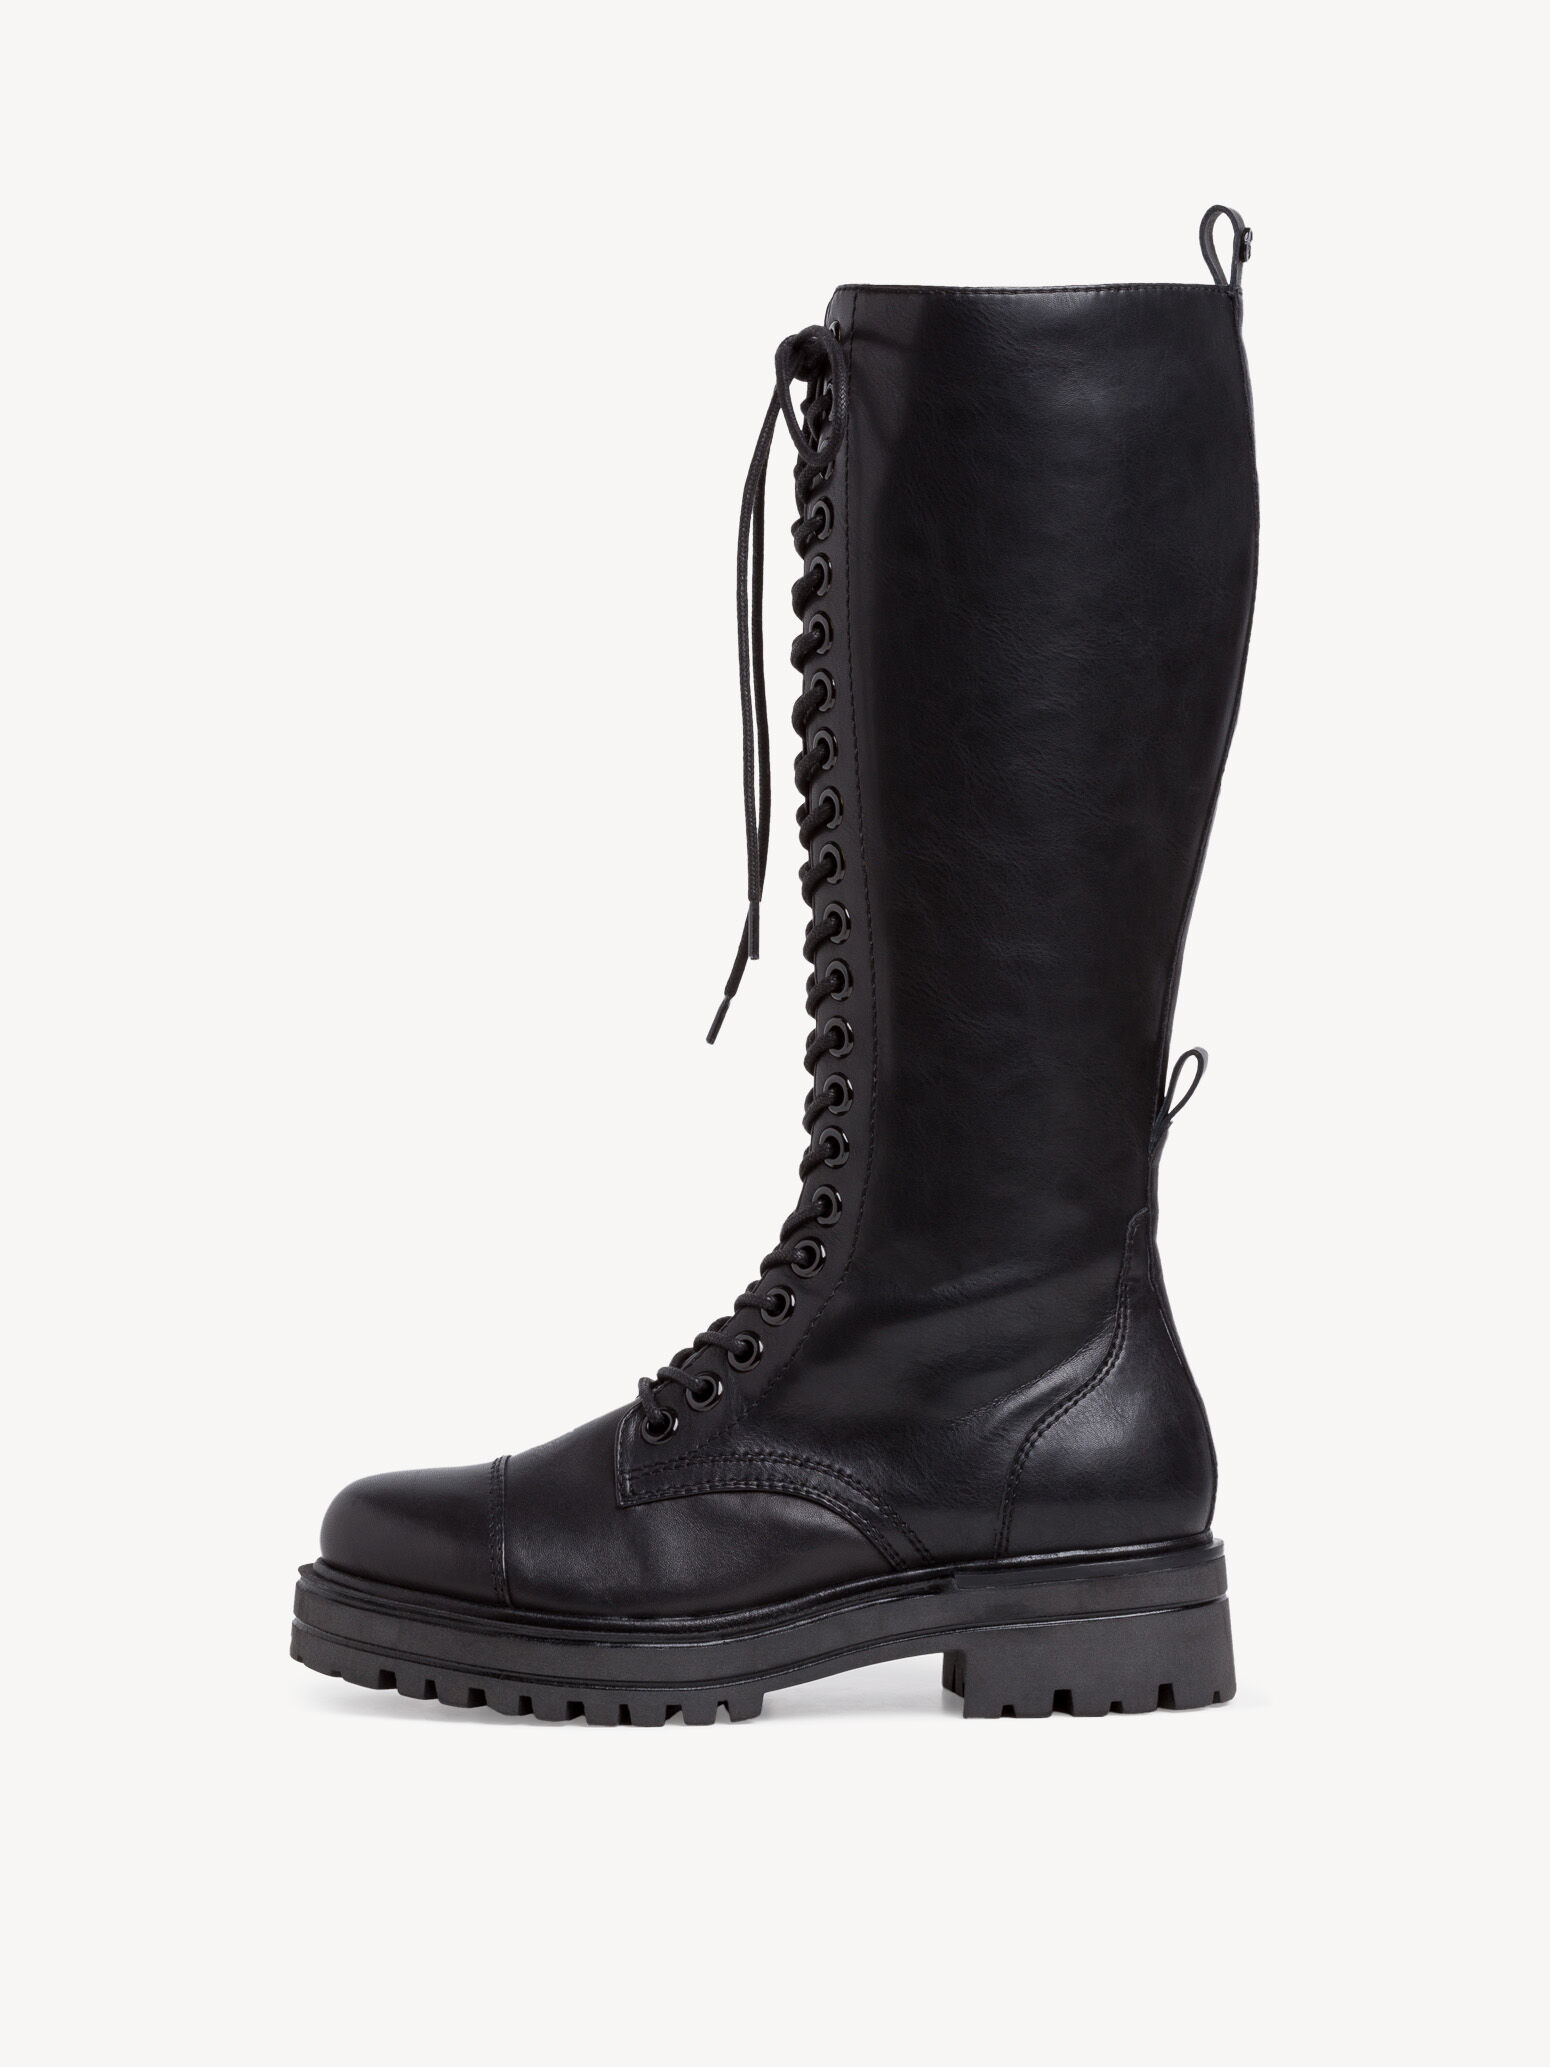 leather boots online